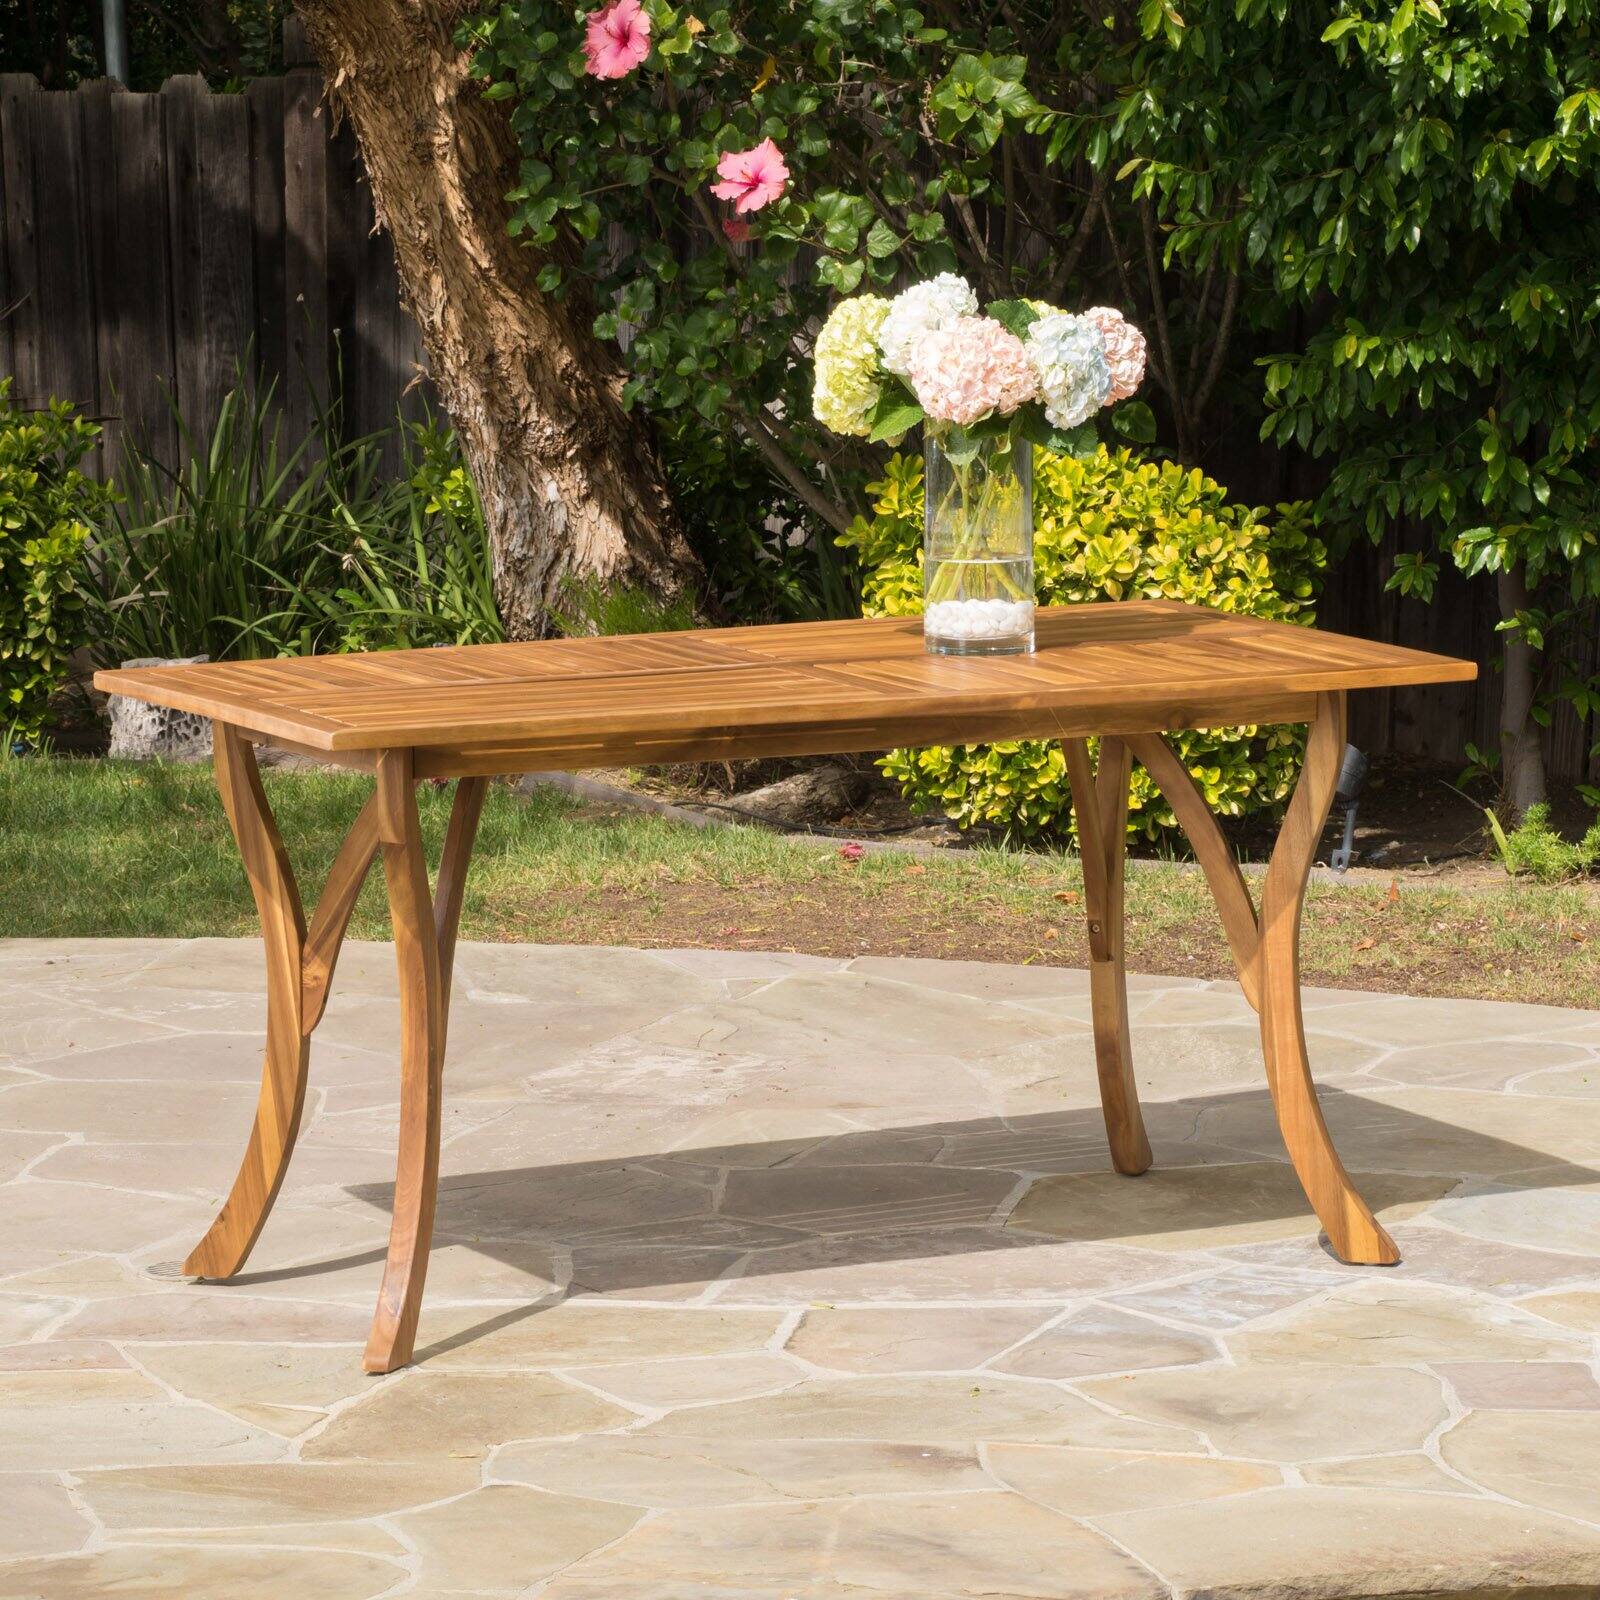 Hermosa Outdoor Acacia Wood Rectangular Dining Table - image 1 of 3